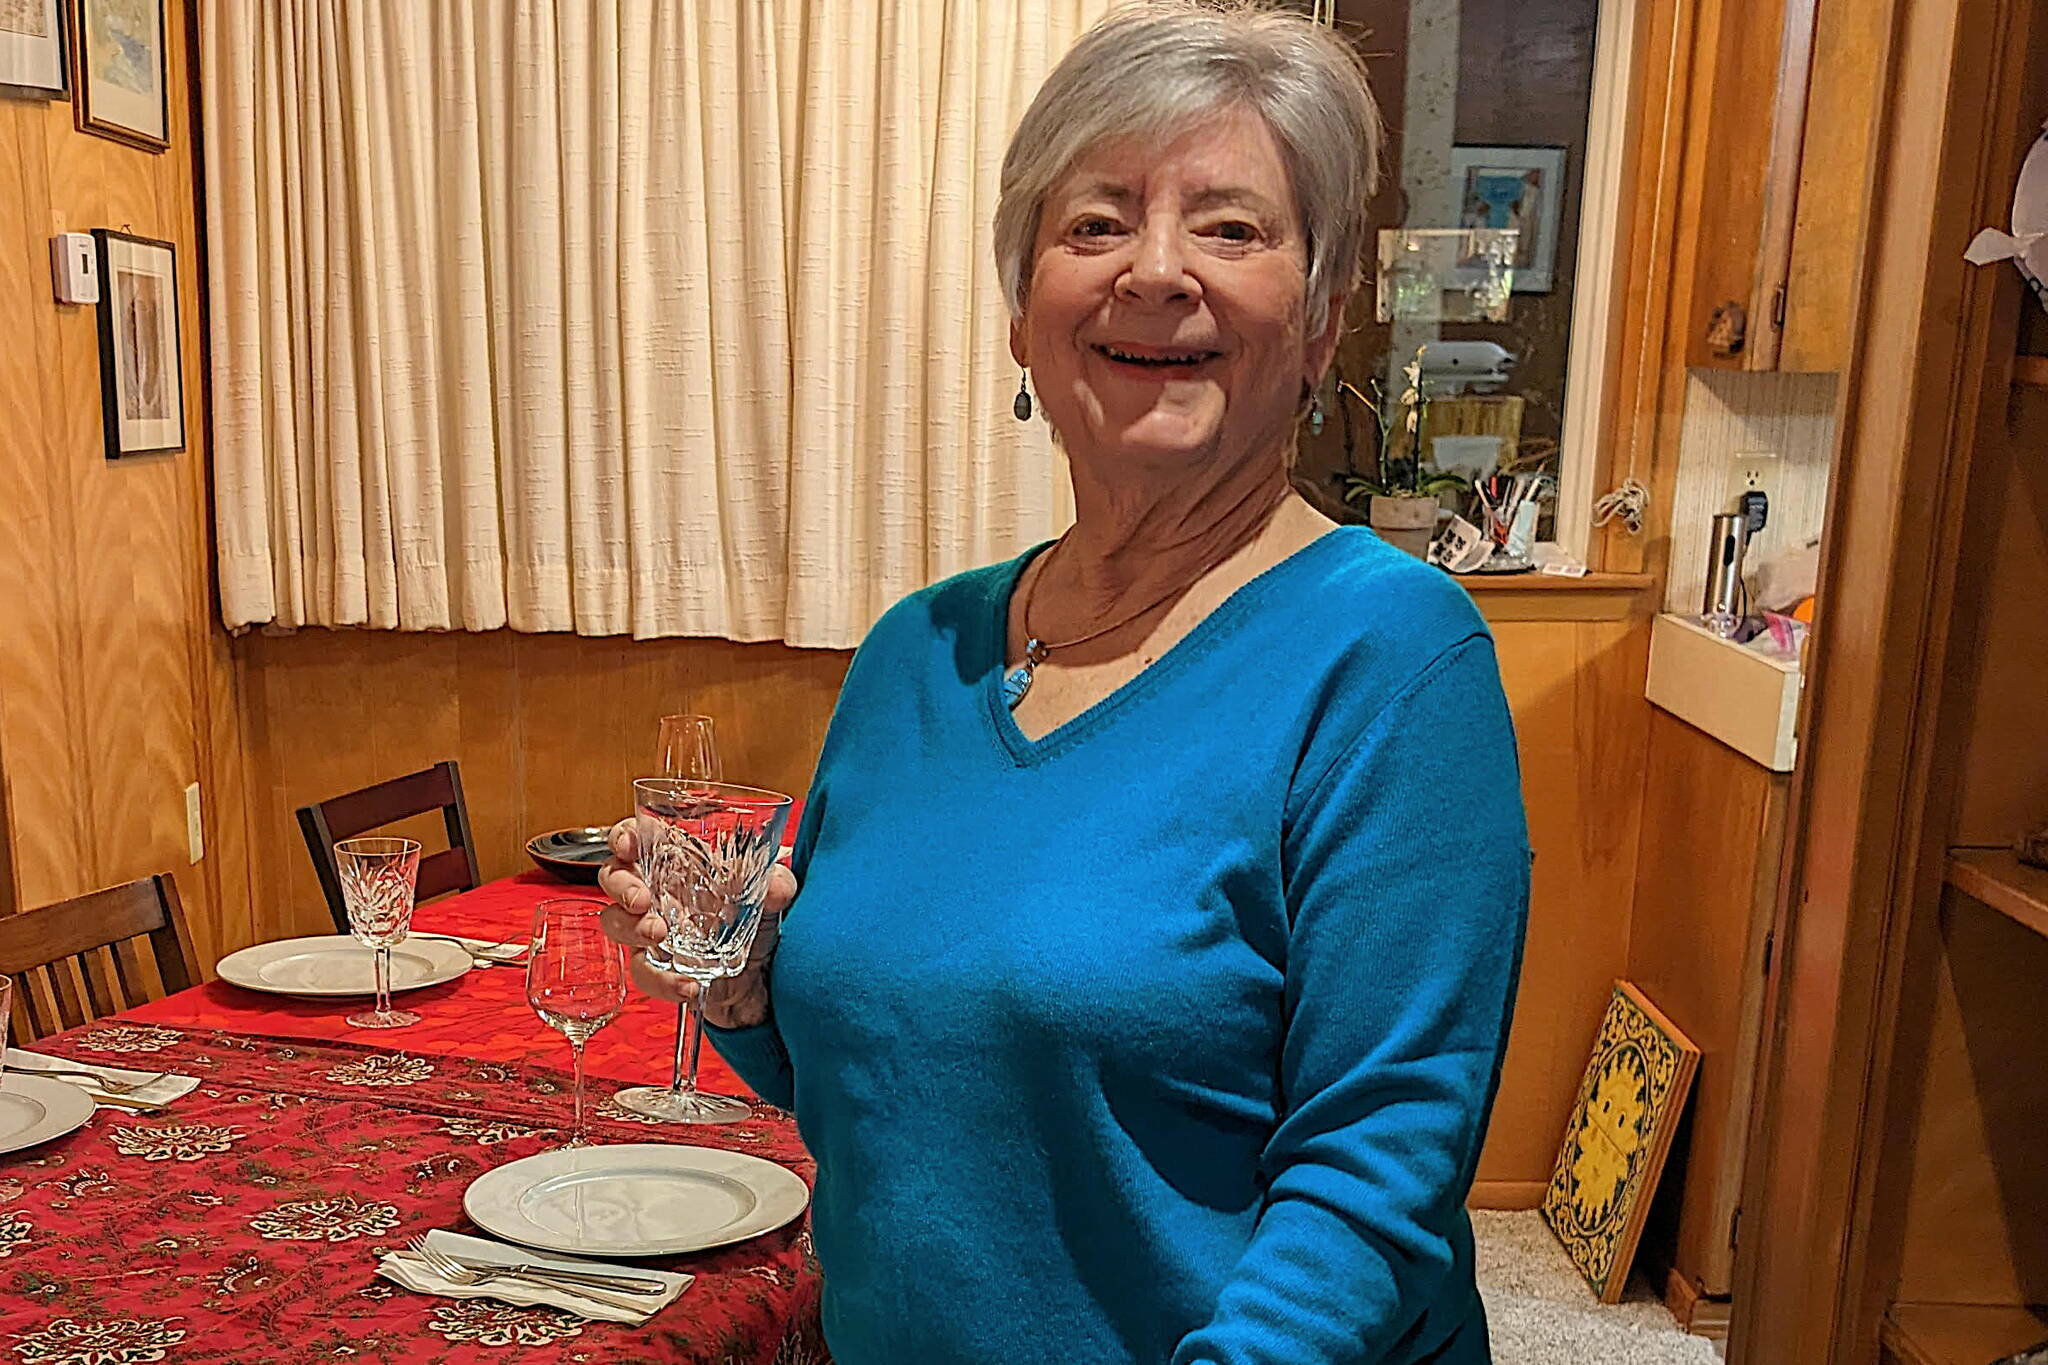 The author getting ready to host a holiday dinner for her family in 2022. (Photo courtesy of Patty Schied)